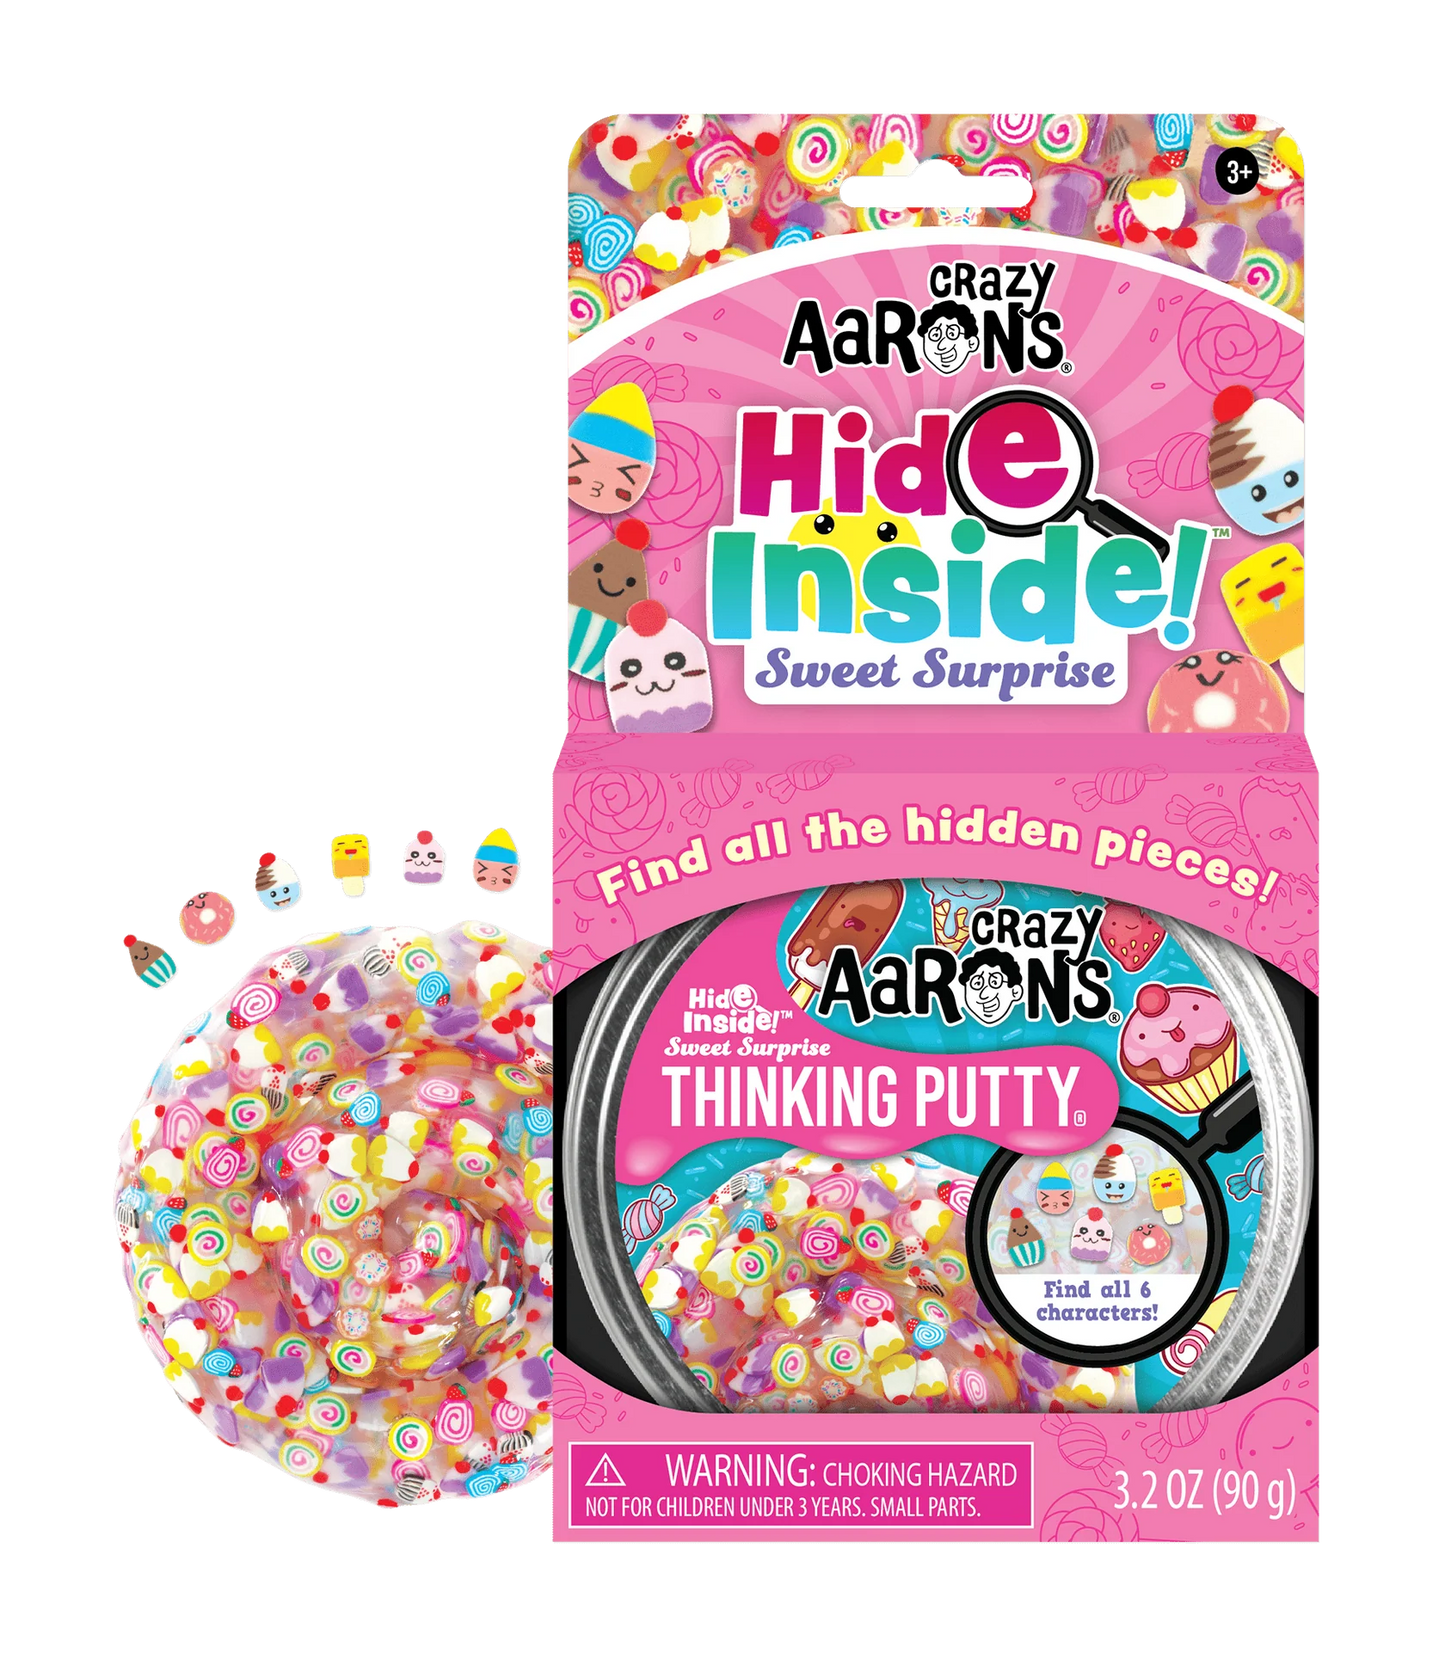 CRAZY AARON'S THINKING PUTTY SWEET SURPRISE HIDE INSIDE